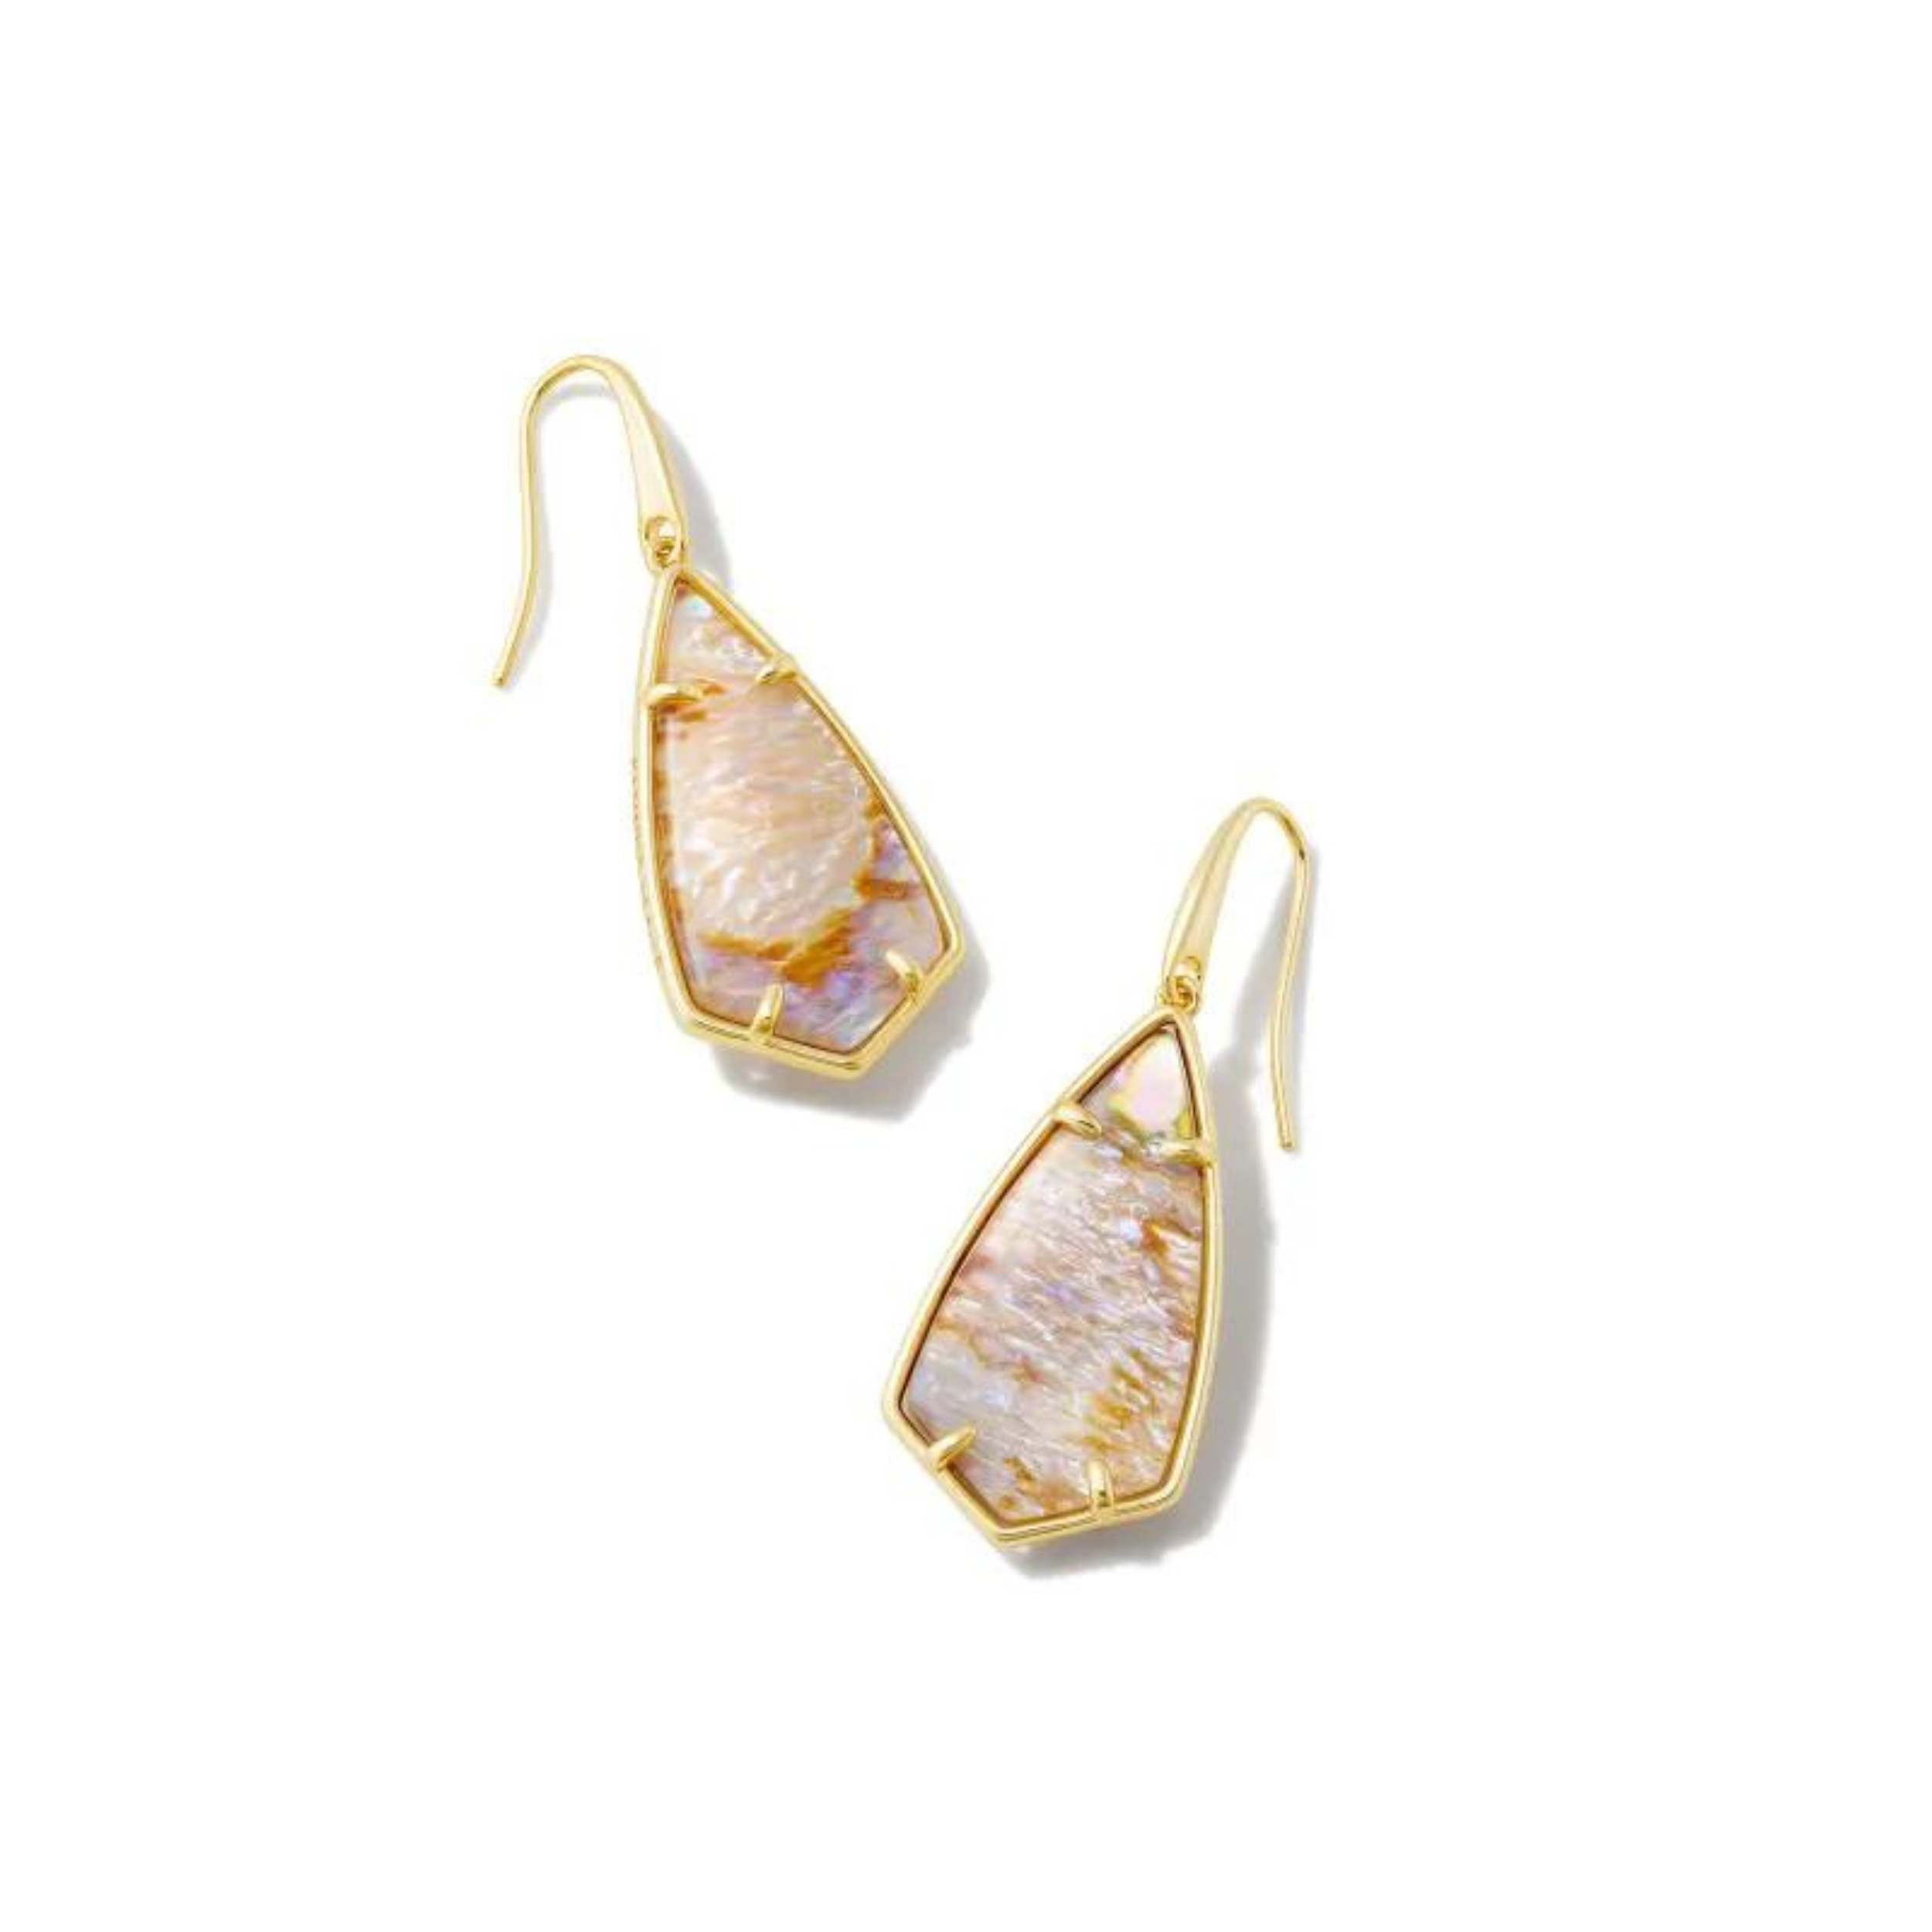 Gold dangle earrings with iridescent abalone stones, pictured on a white background.